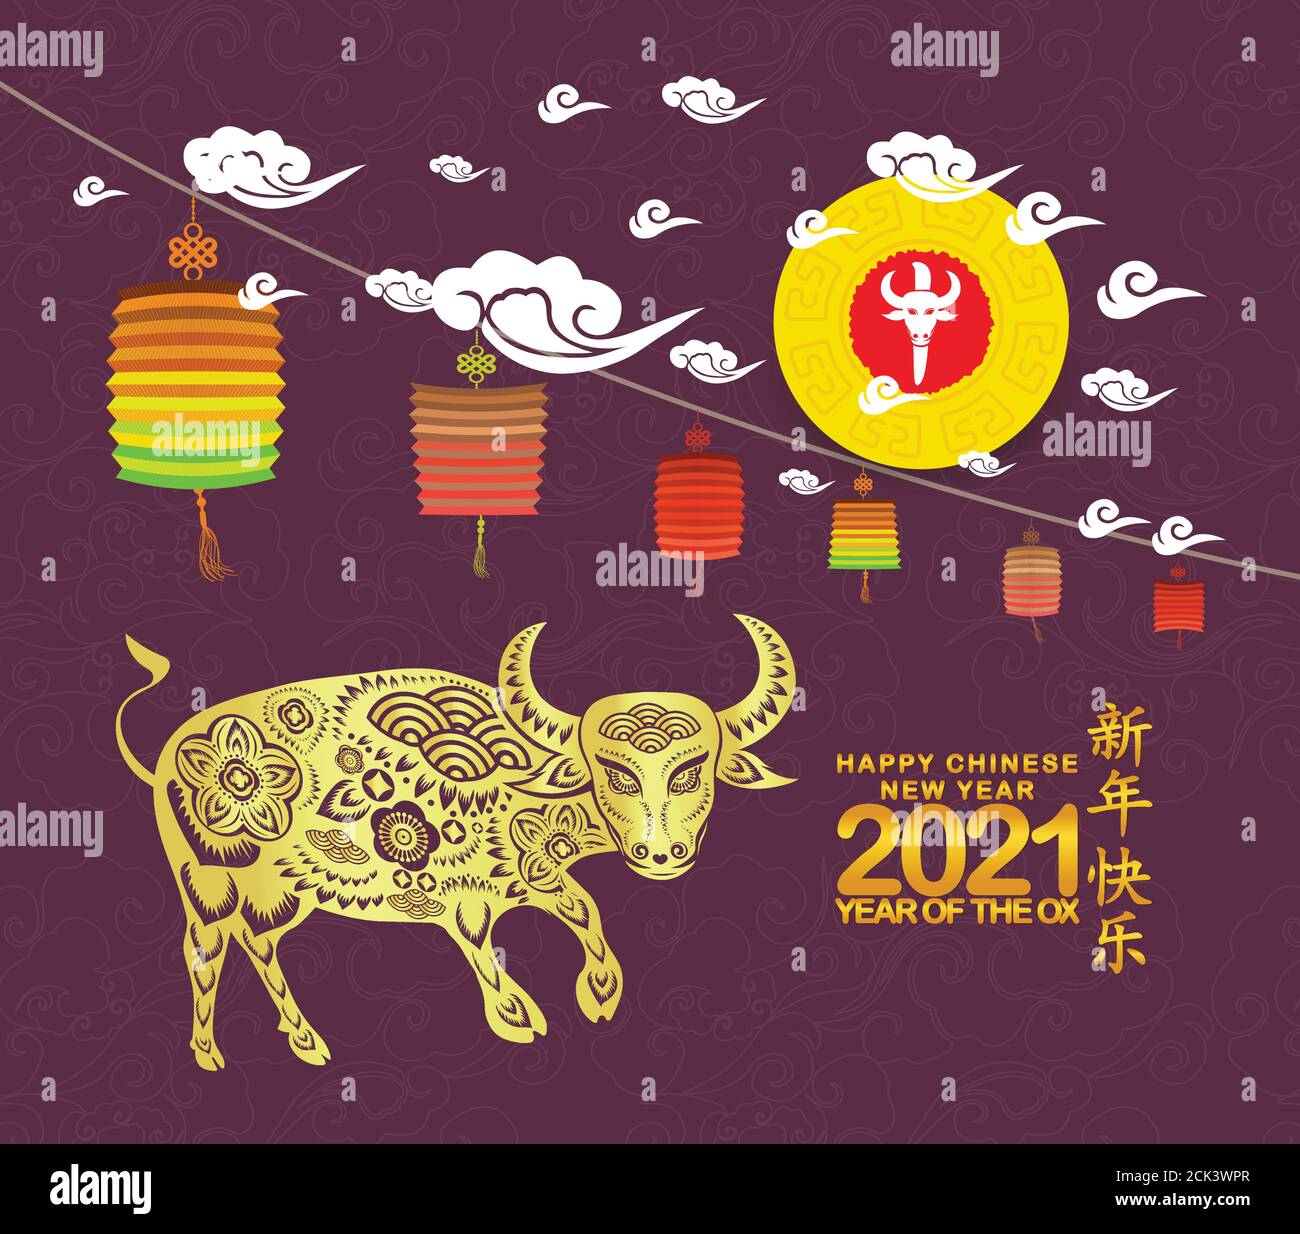 Happy New Year 21 Greeting Card Chinese New Year Of The Ox Chinese Translation Happy Chinese New Year Year Of Ox Stock Vector Image Art Alamy